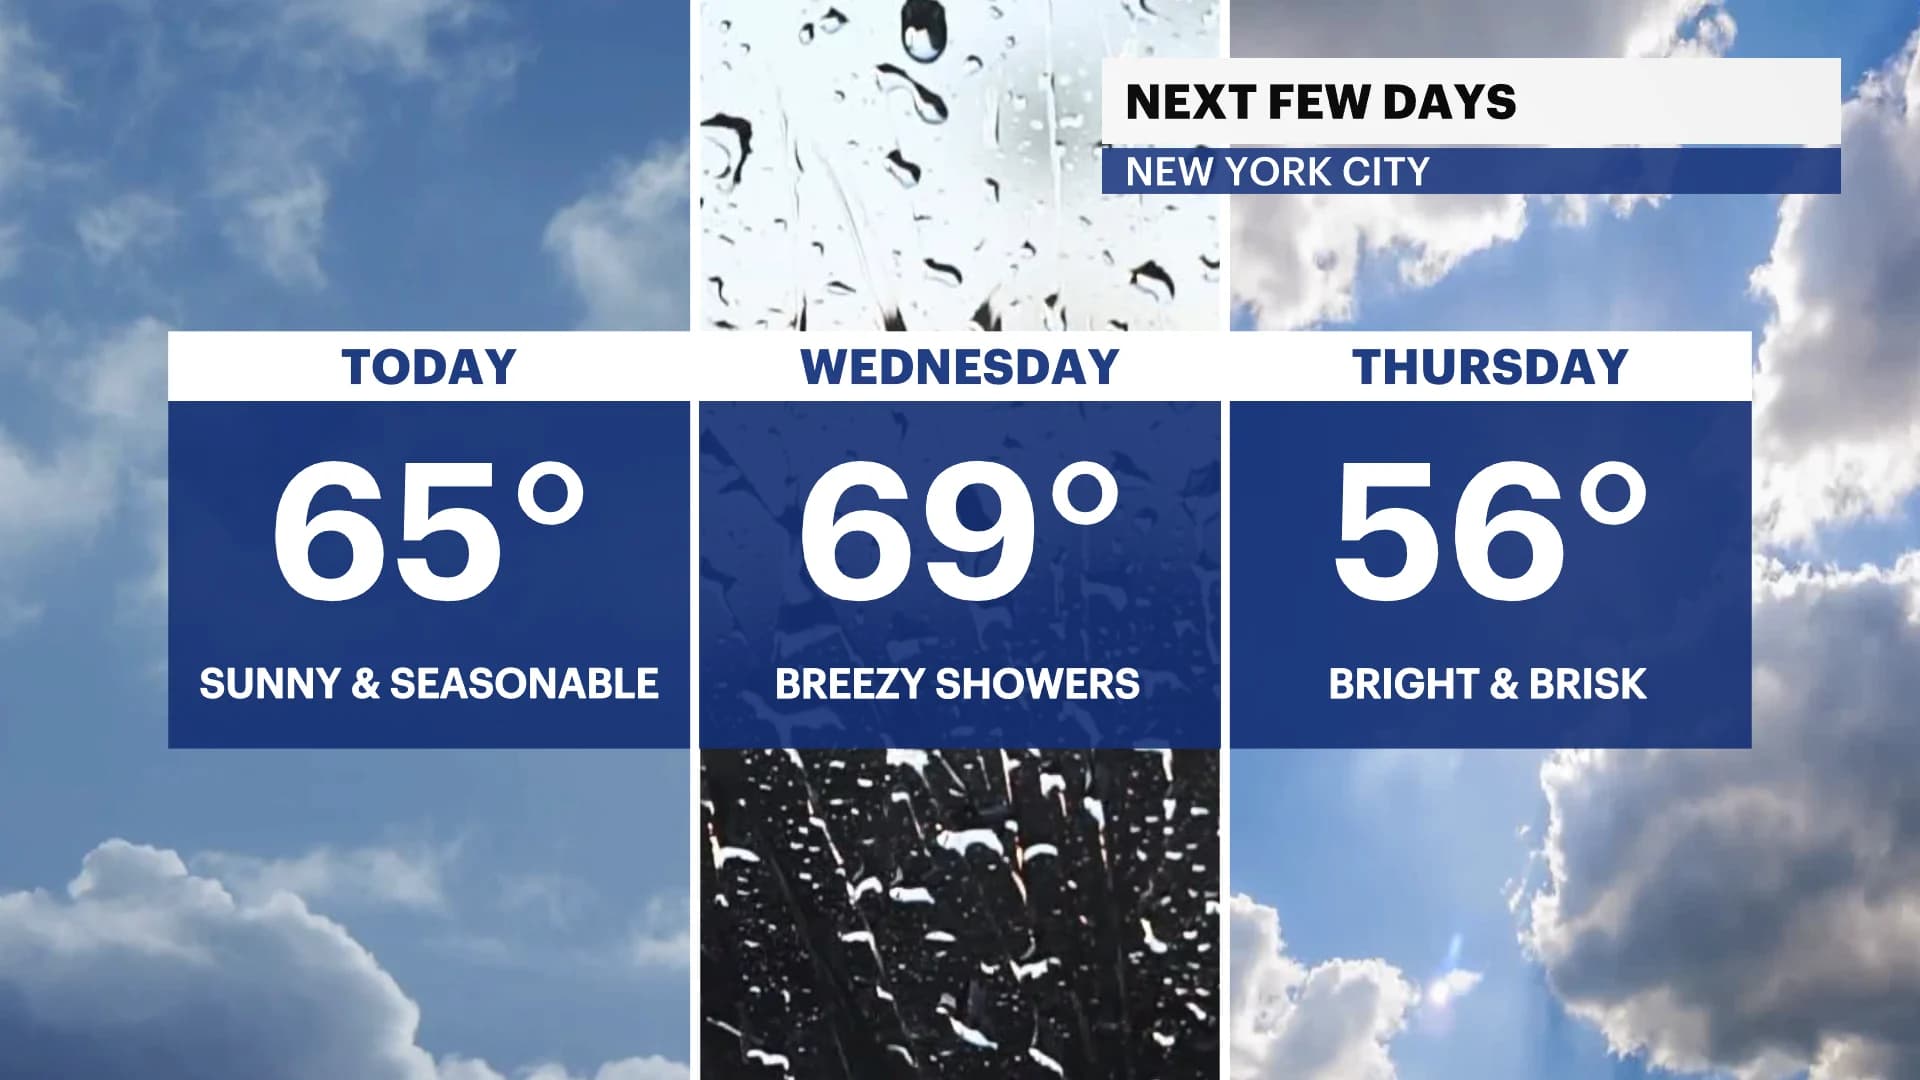 Another spring-tastic day for NYC; tracking spotty showers into Wednesday